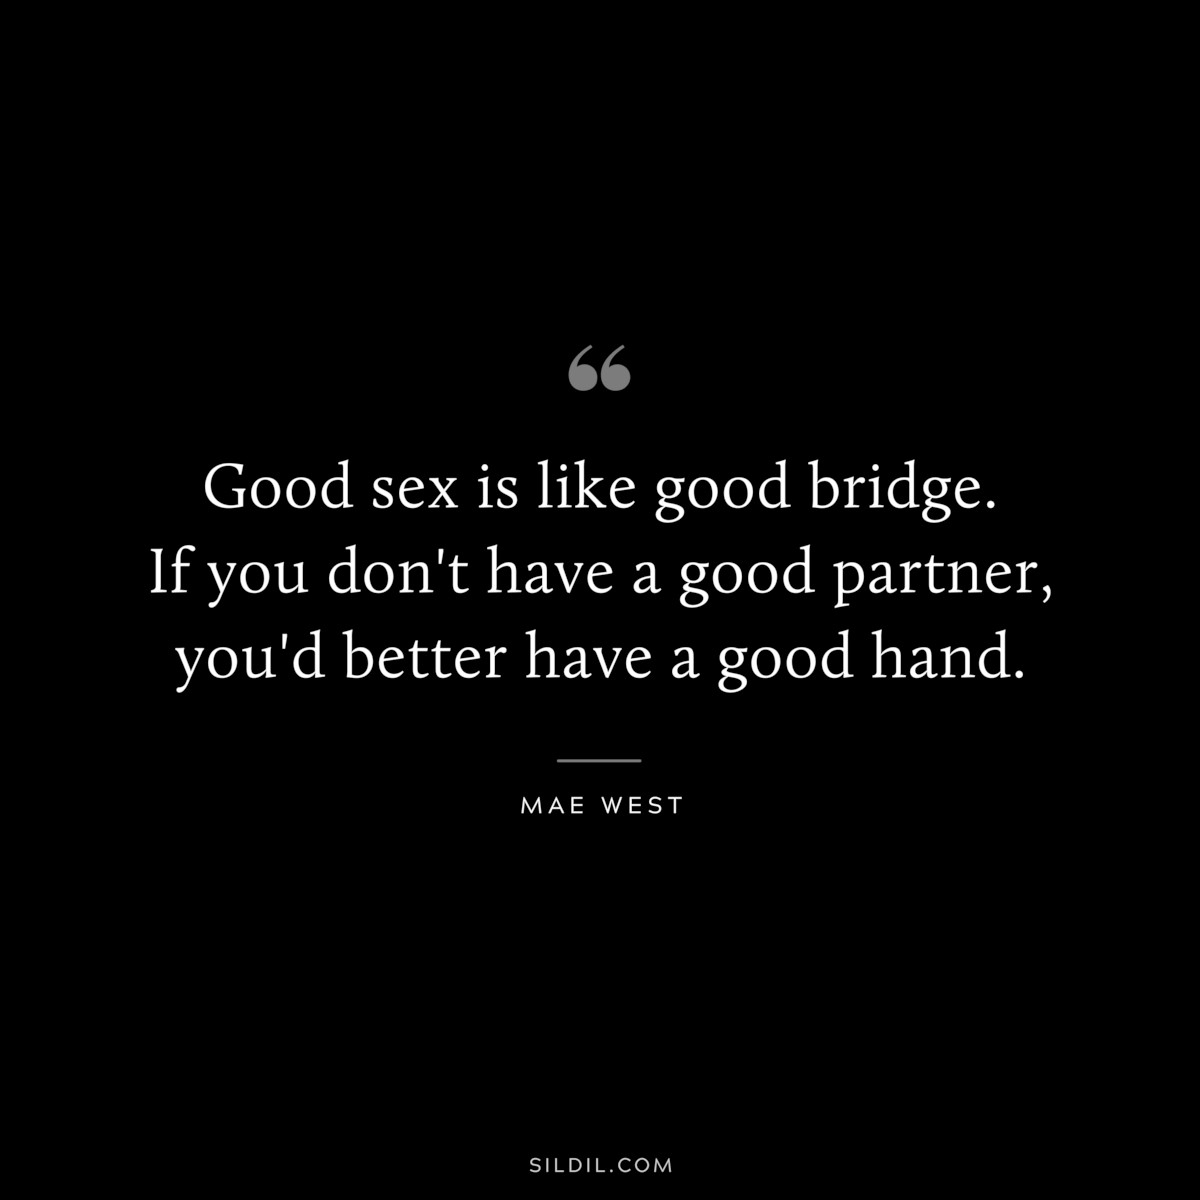 Good sex is like good bridge. If you don't have a good partner, you'd better have a good hand. ― Mae West